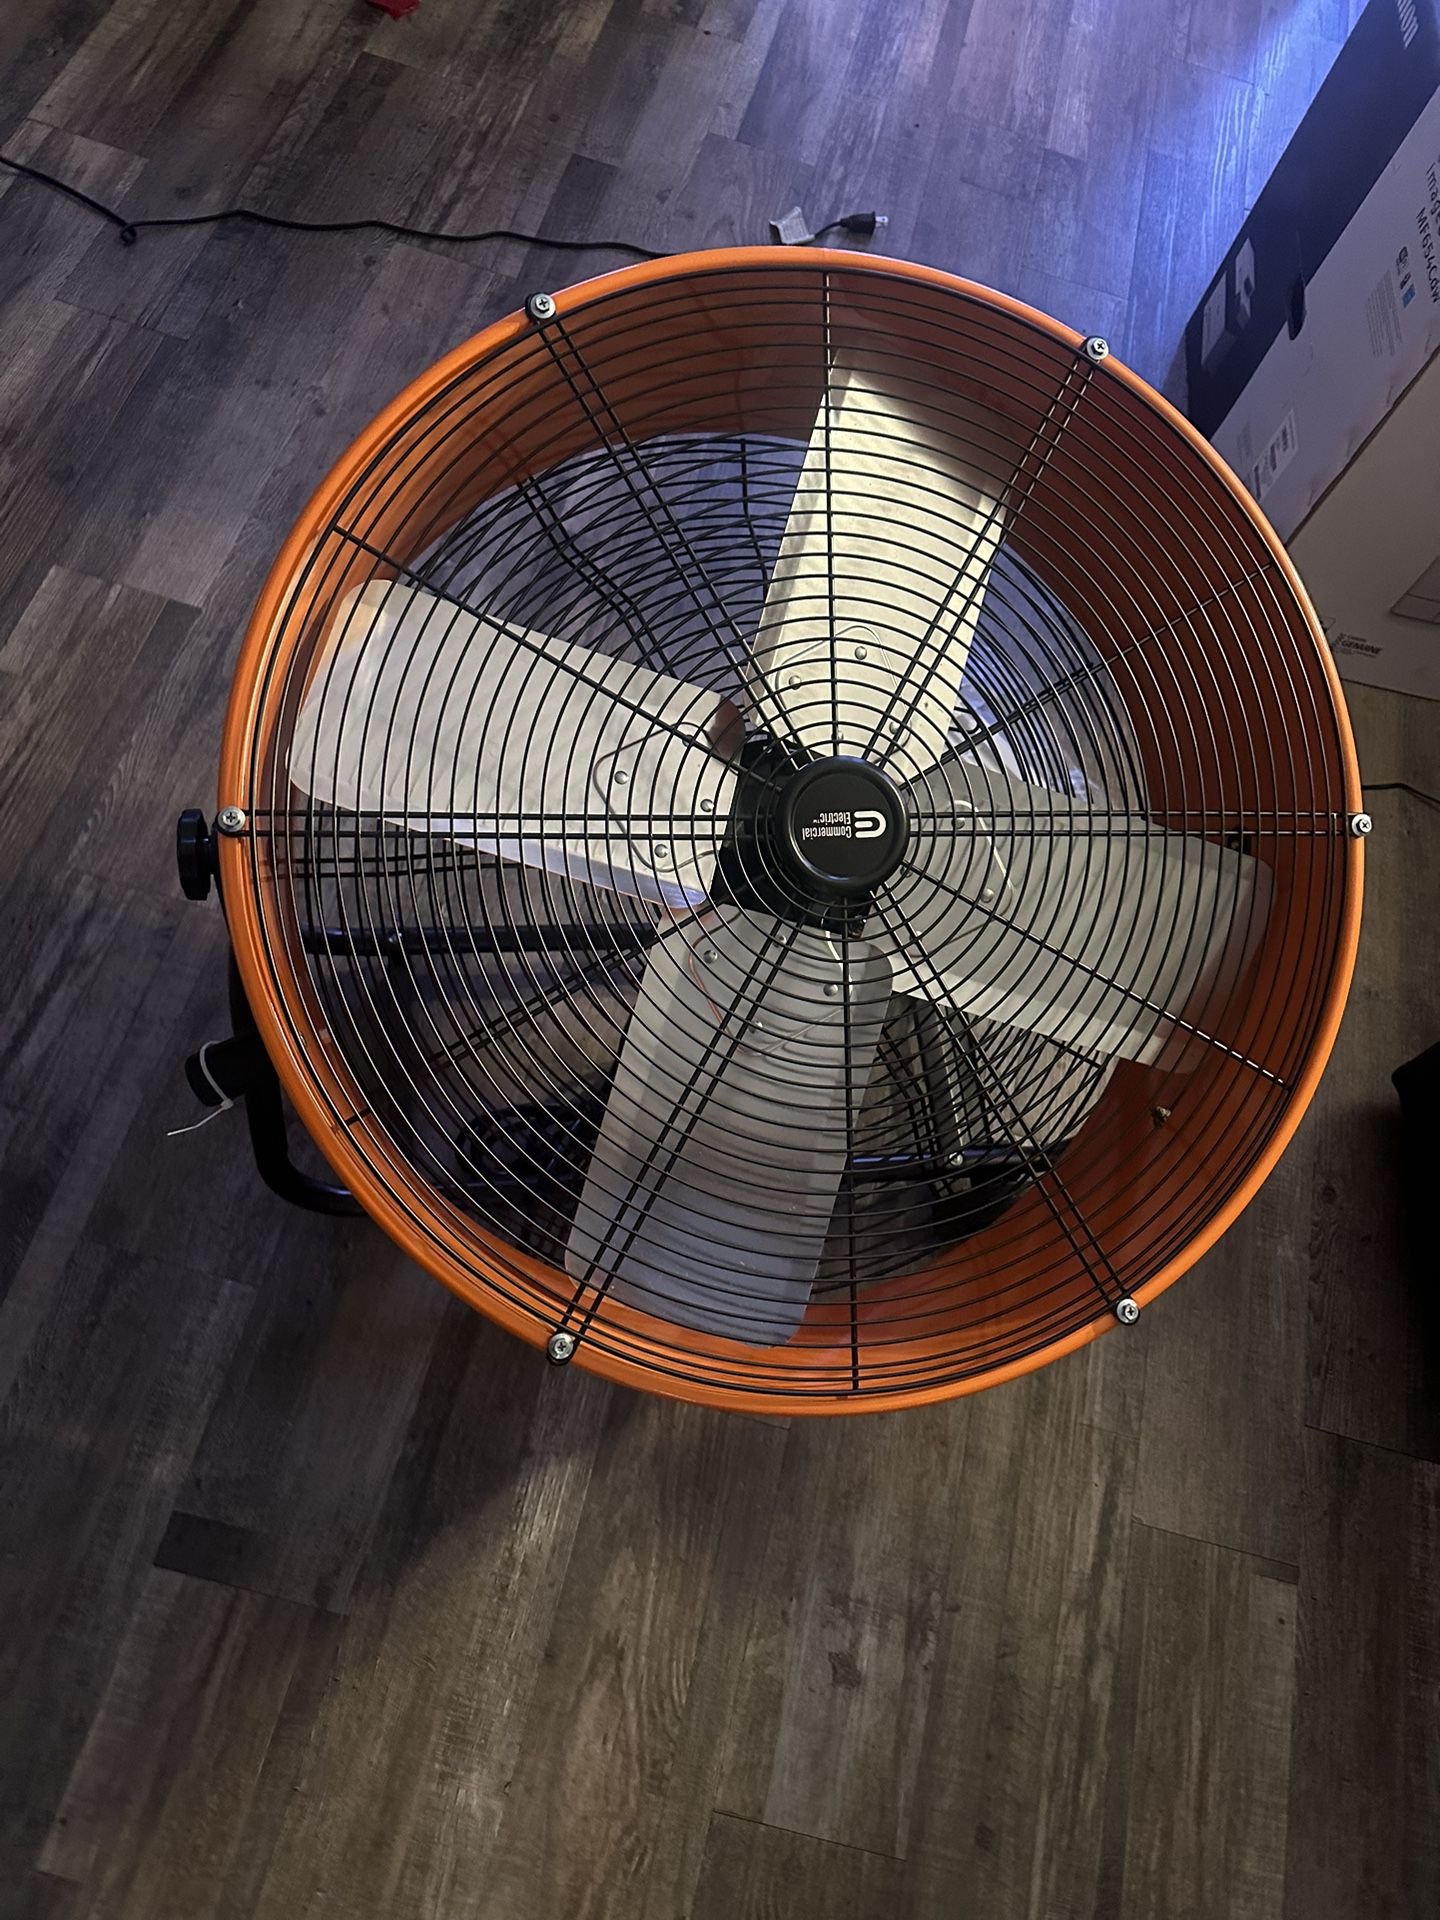 COMMERCIAL ELECTRIC INDUSTRIAL FANS